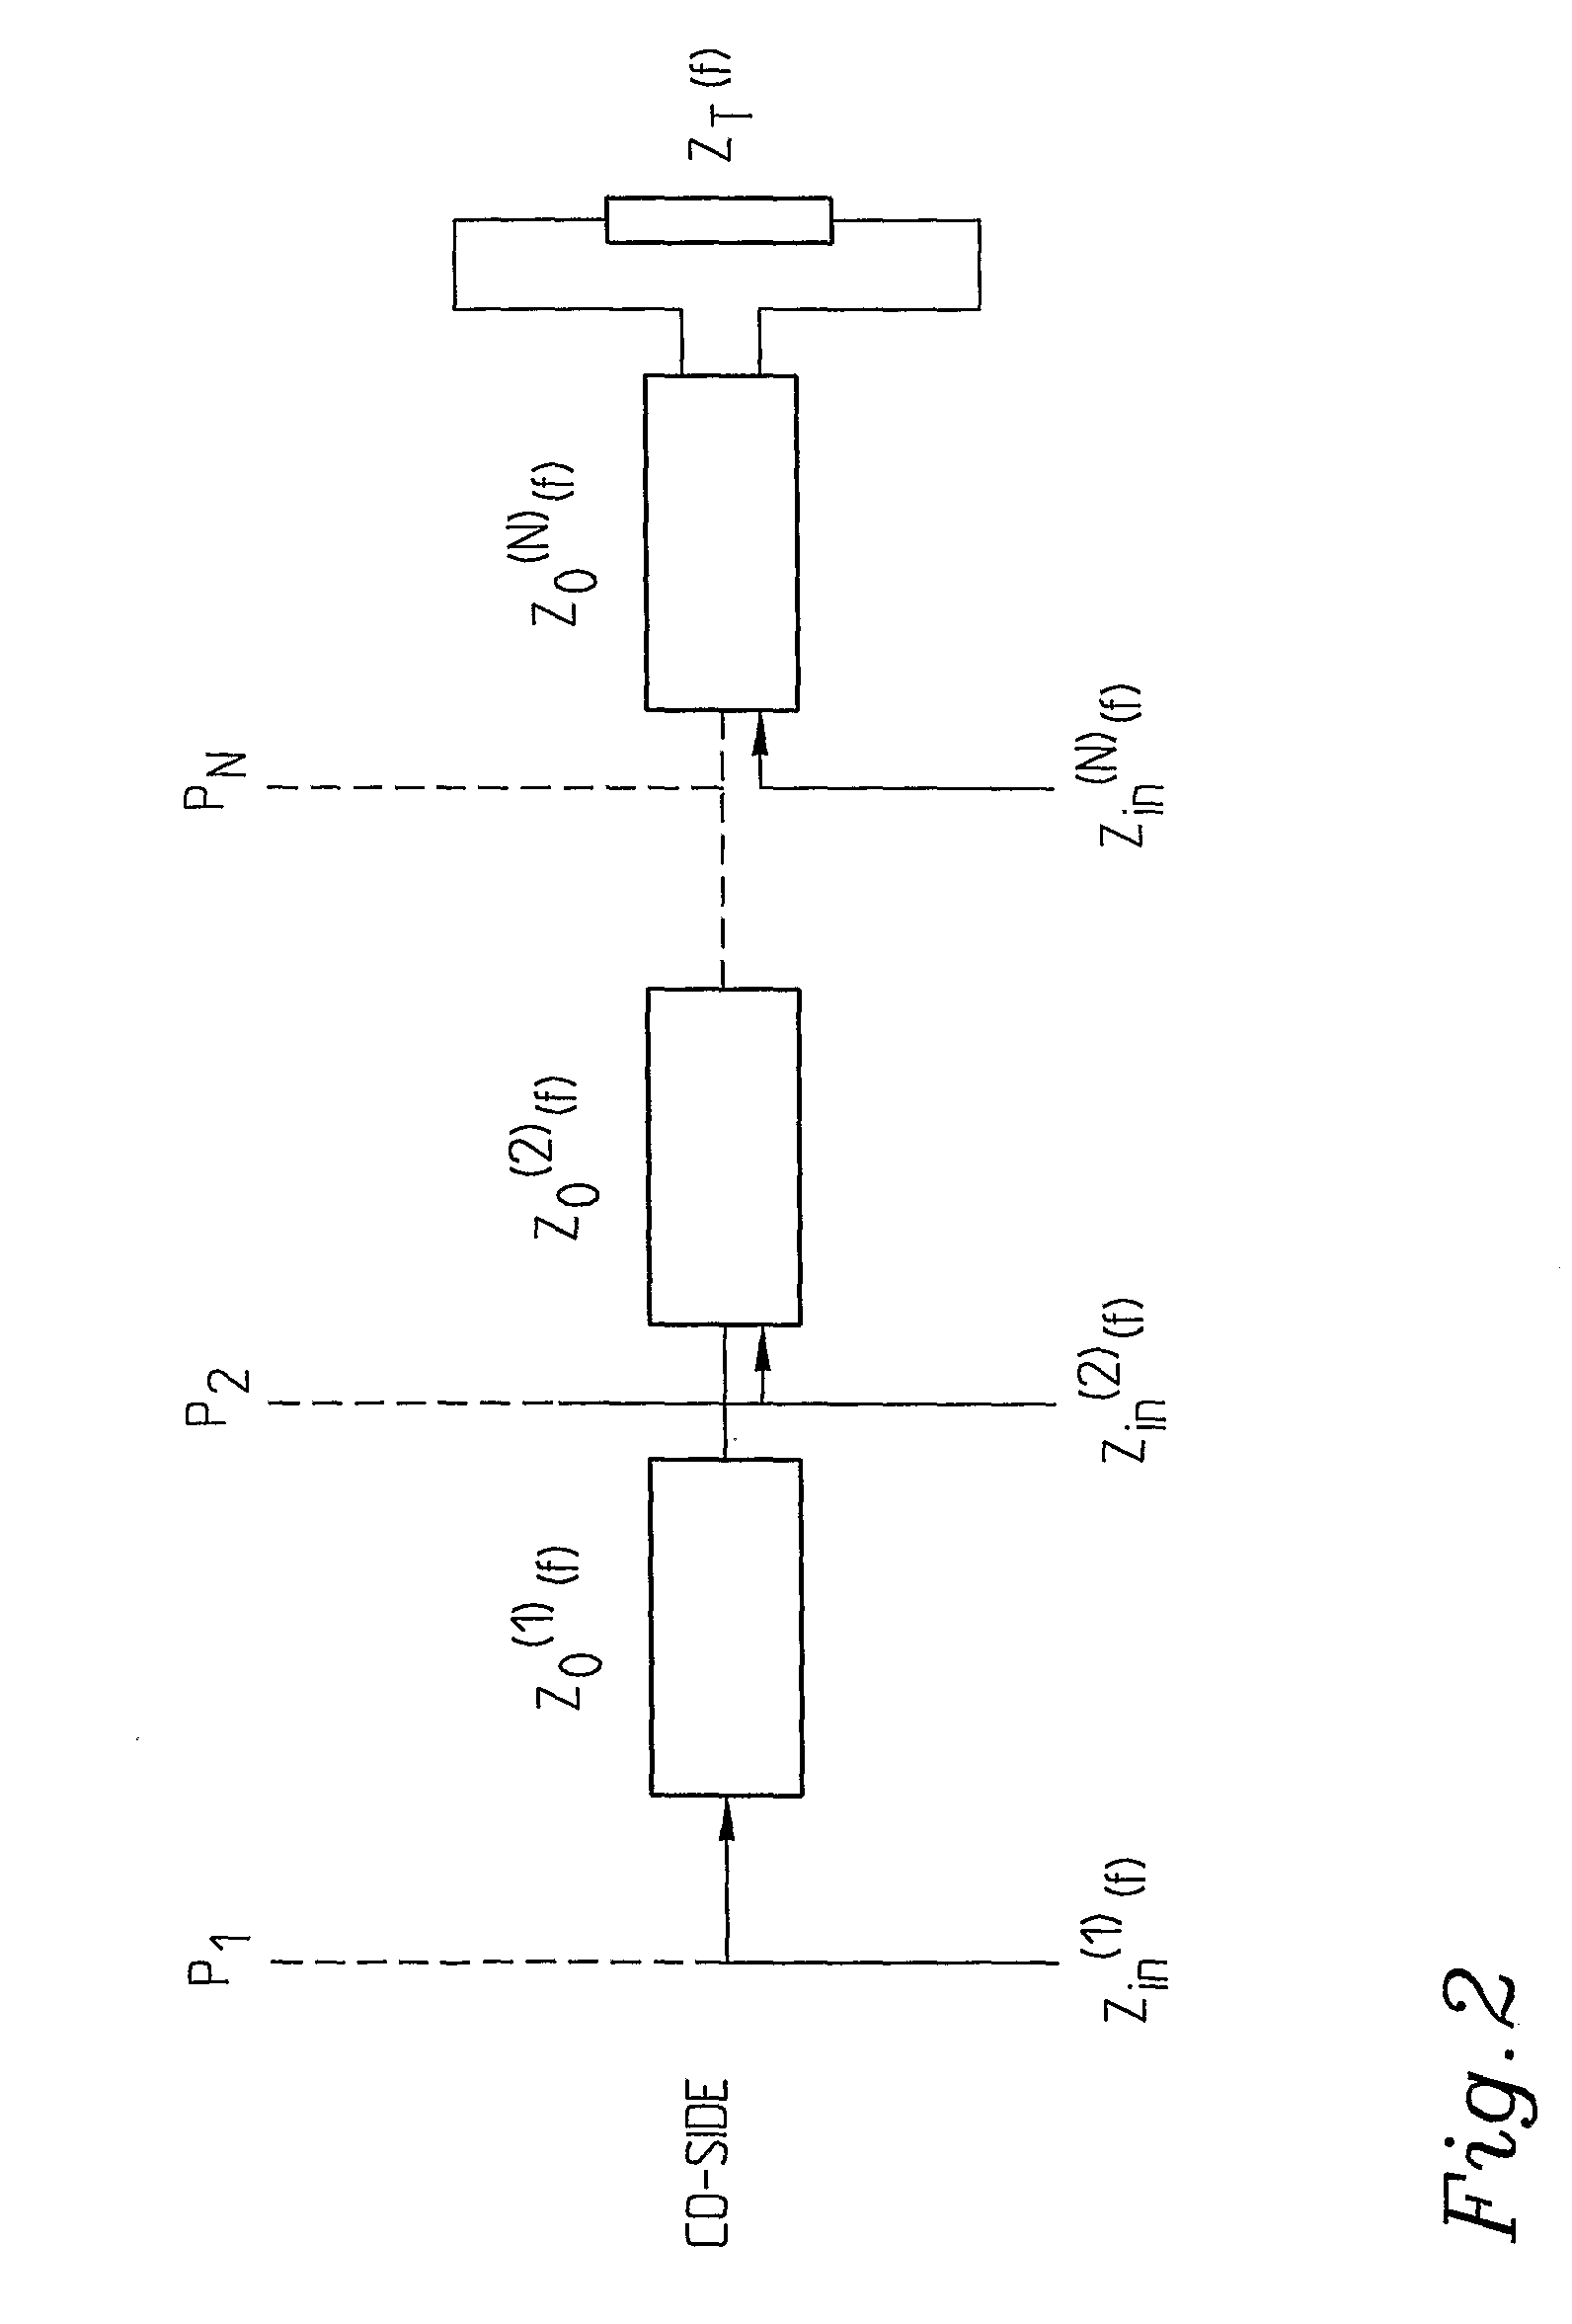 Method and a System for Cable or Subscriber Loop Investigation Performing Loop Topology Identification